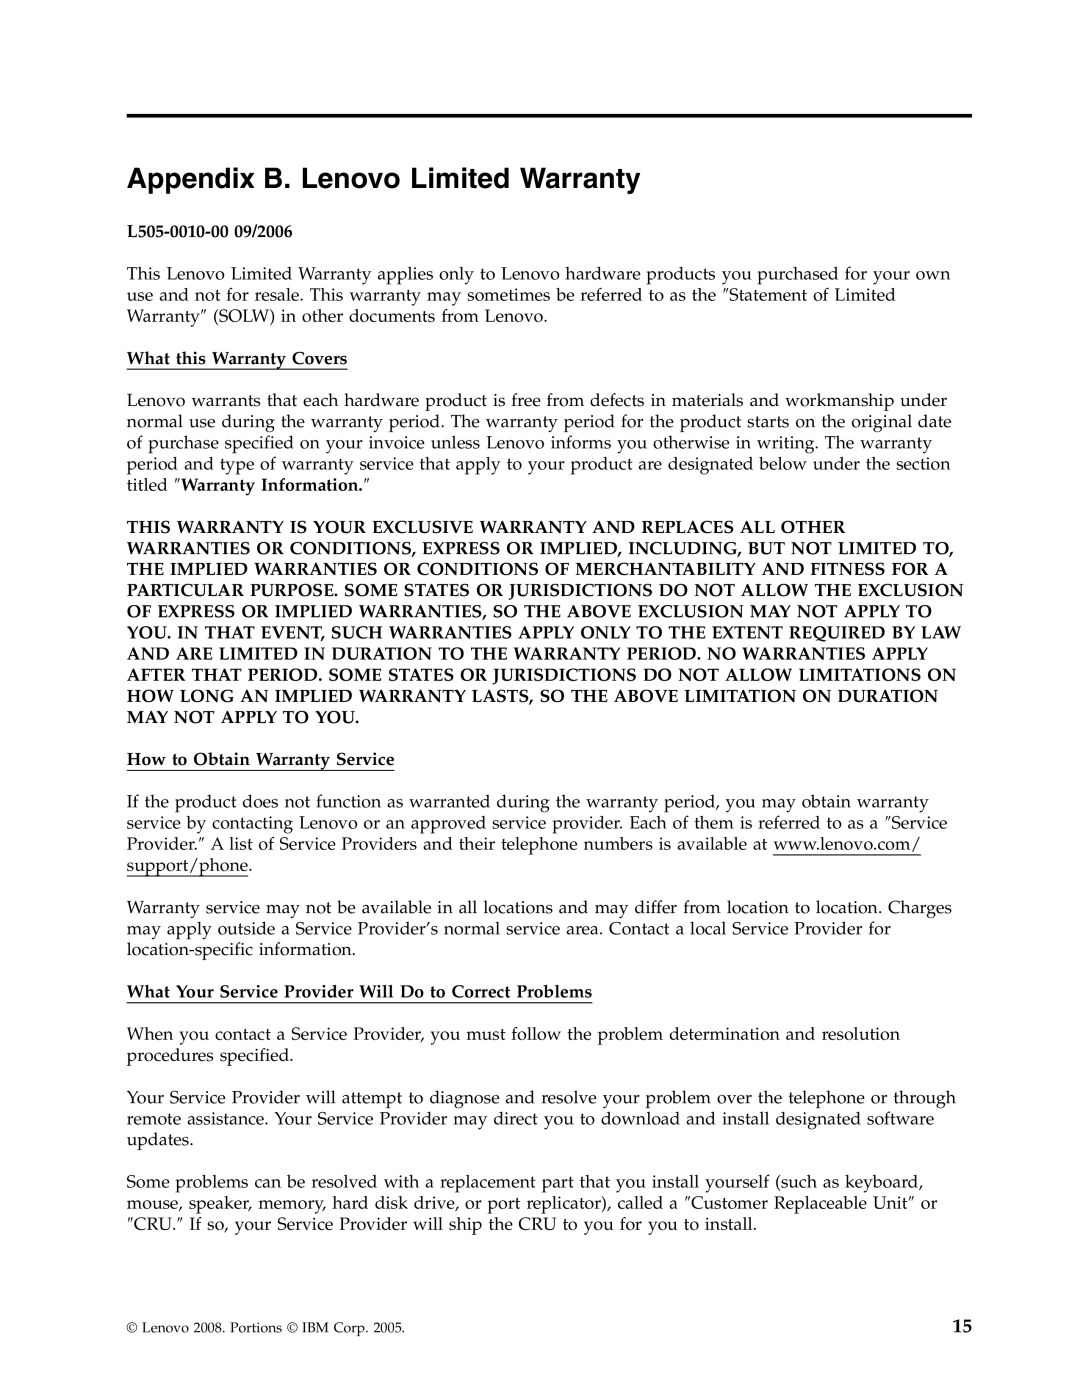 Lenovo 43N3222 manual Appendix B. Lenovo Limited Warranty, L505-0010-0009/2006, What this Warranty Covers 